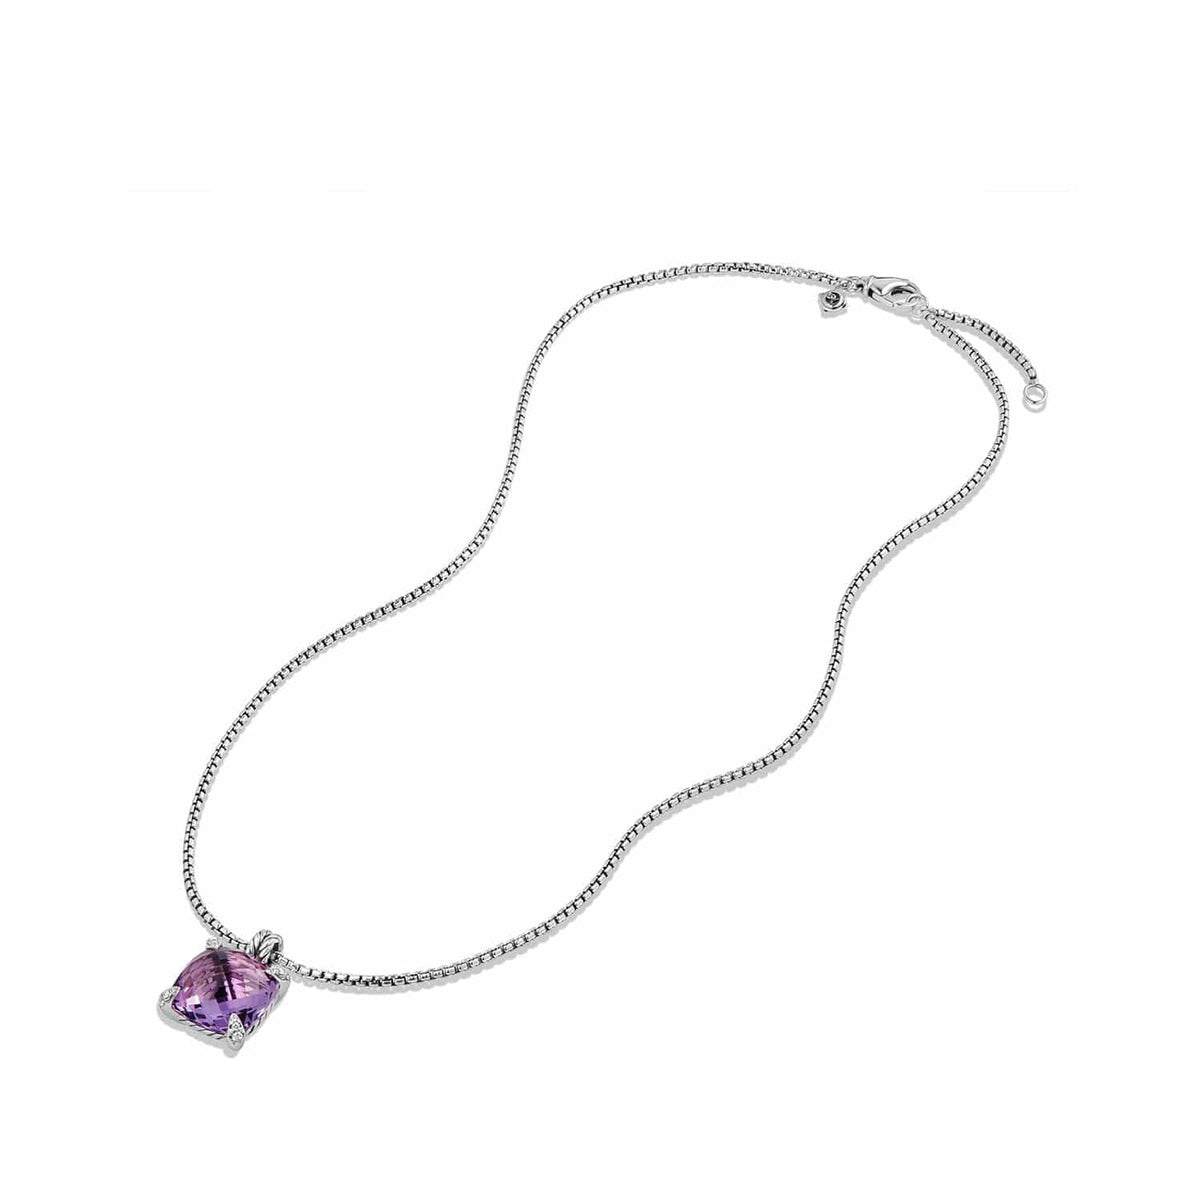 Pendant Necklace with Amethyst and Diamonds